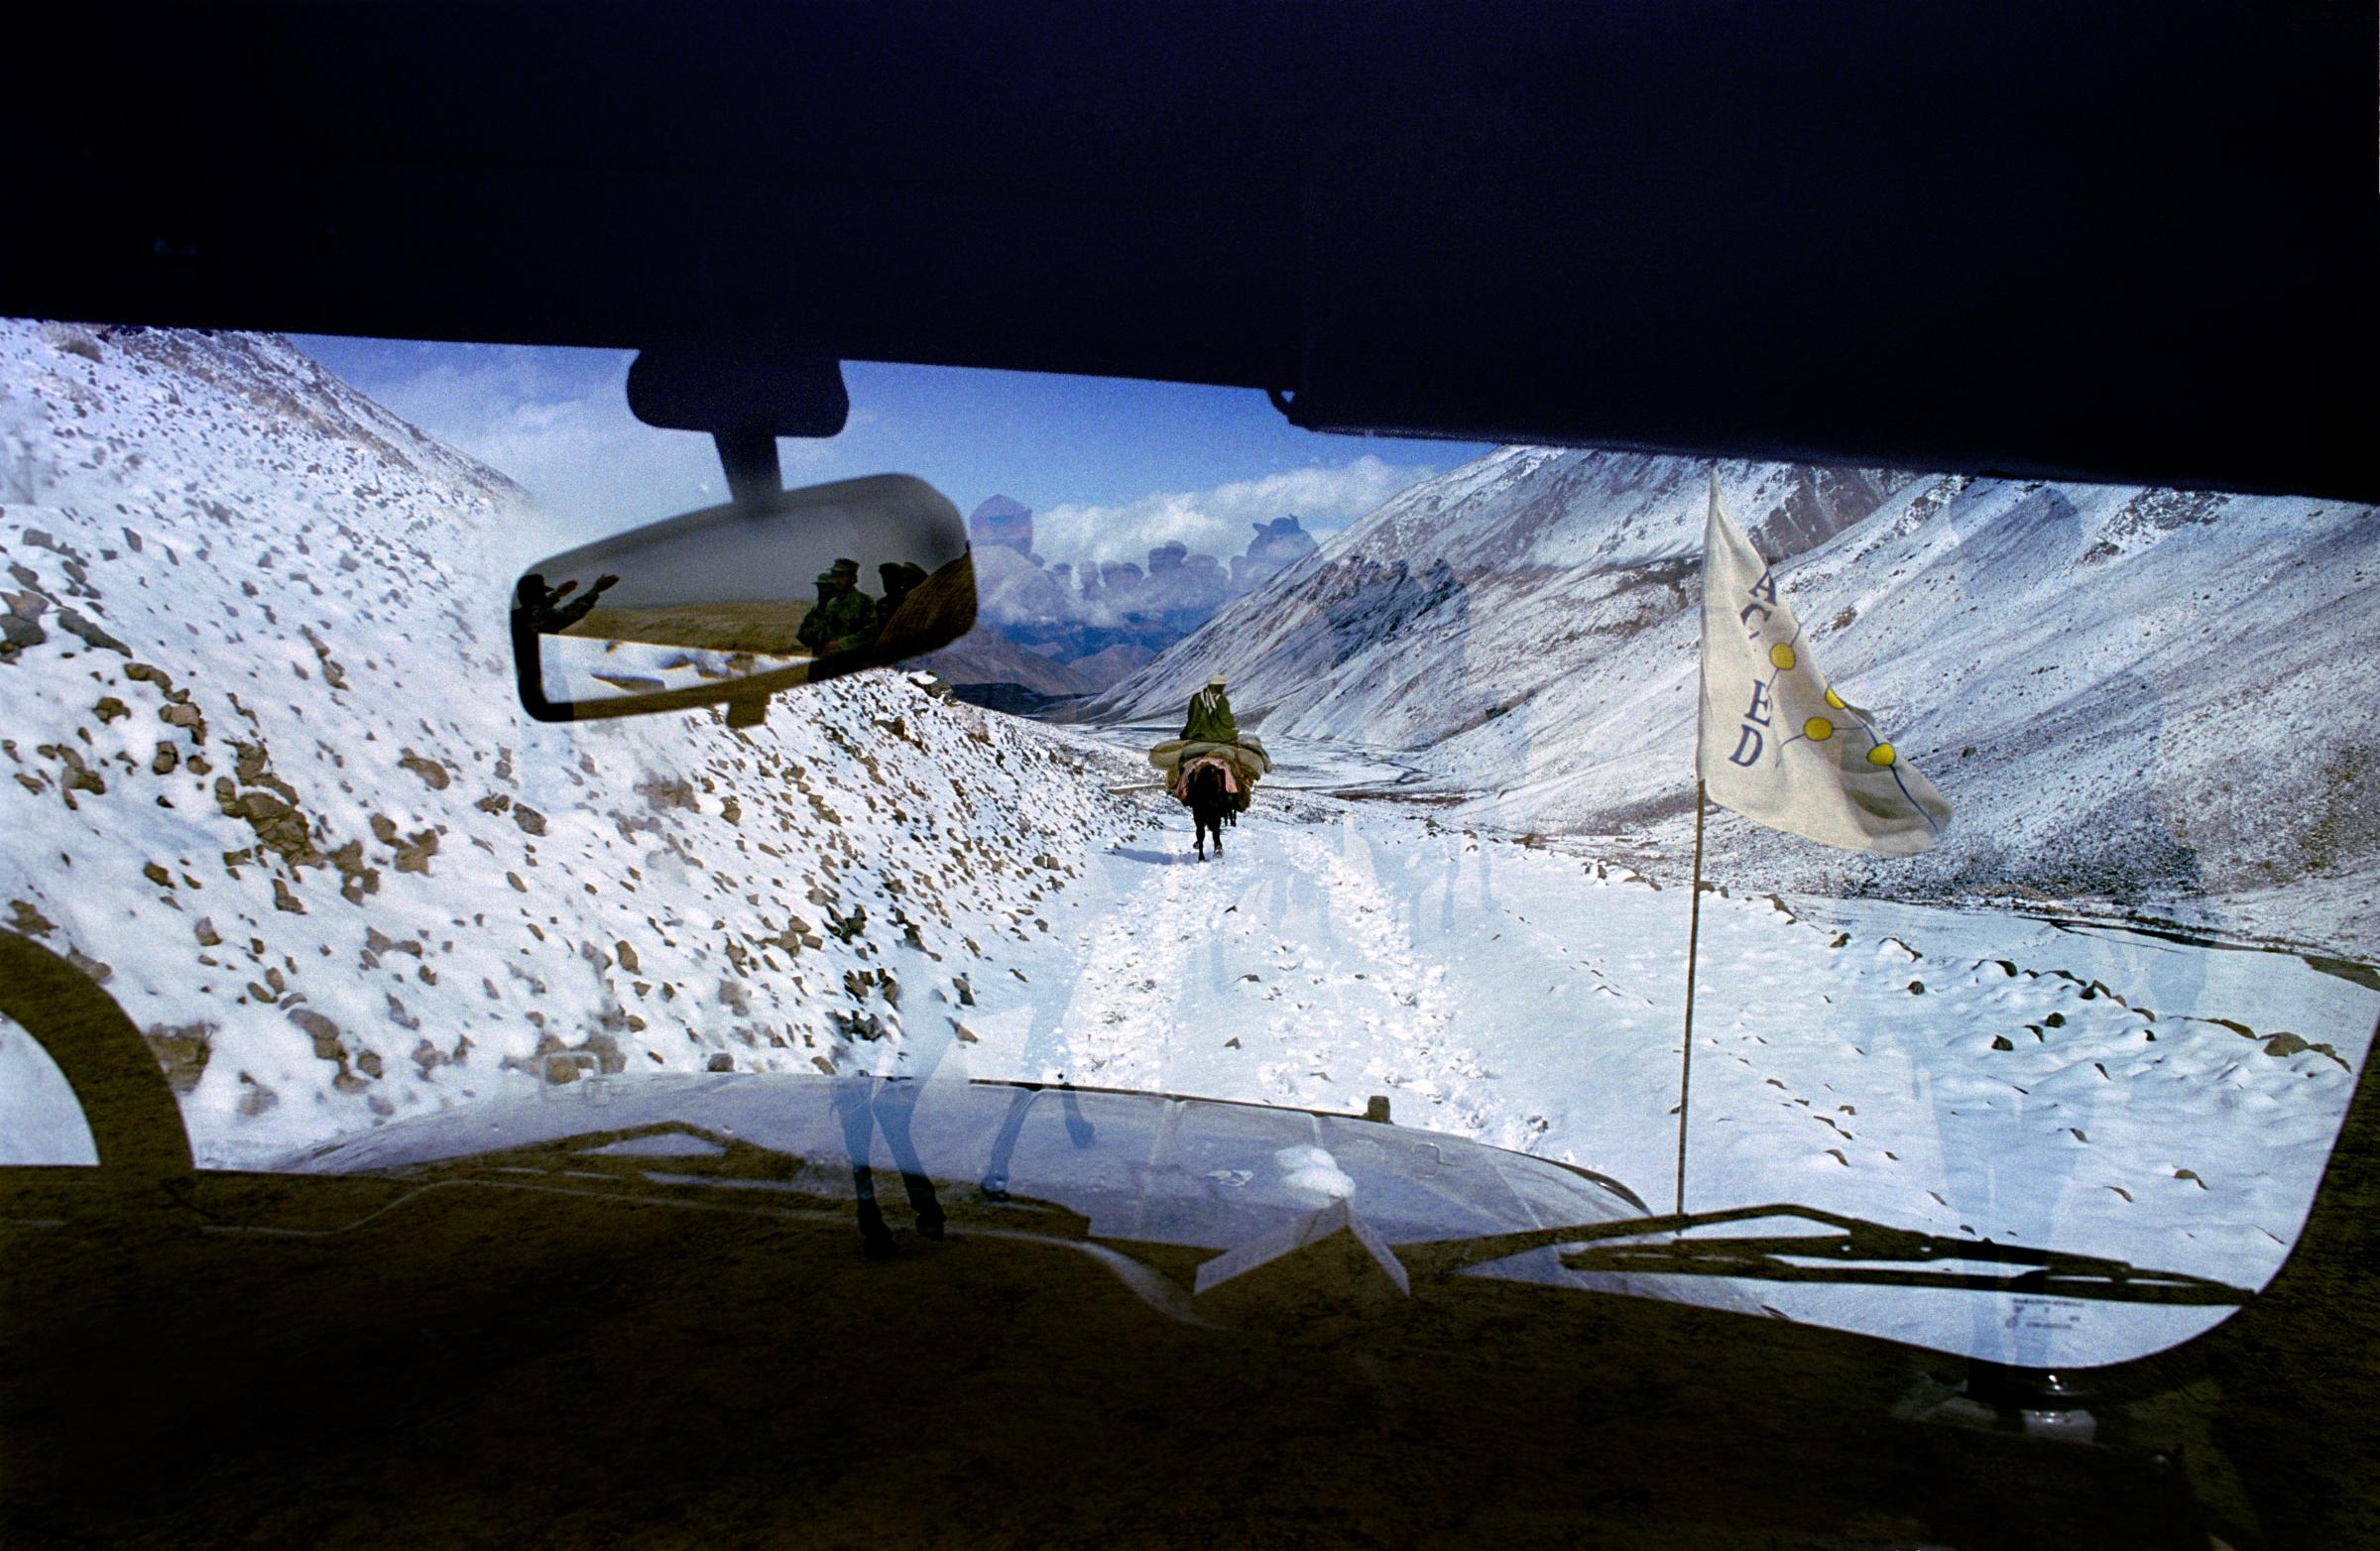 Accidental Exposures - “Before I arrived in Afghanistan, I was in Moscow,...